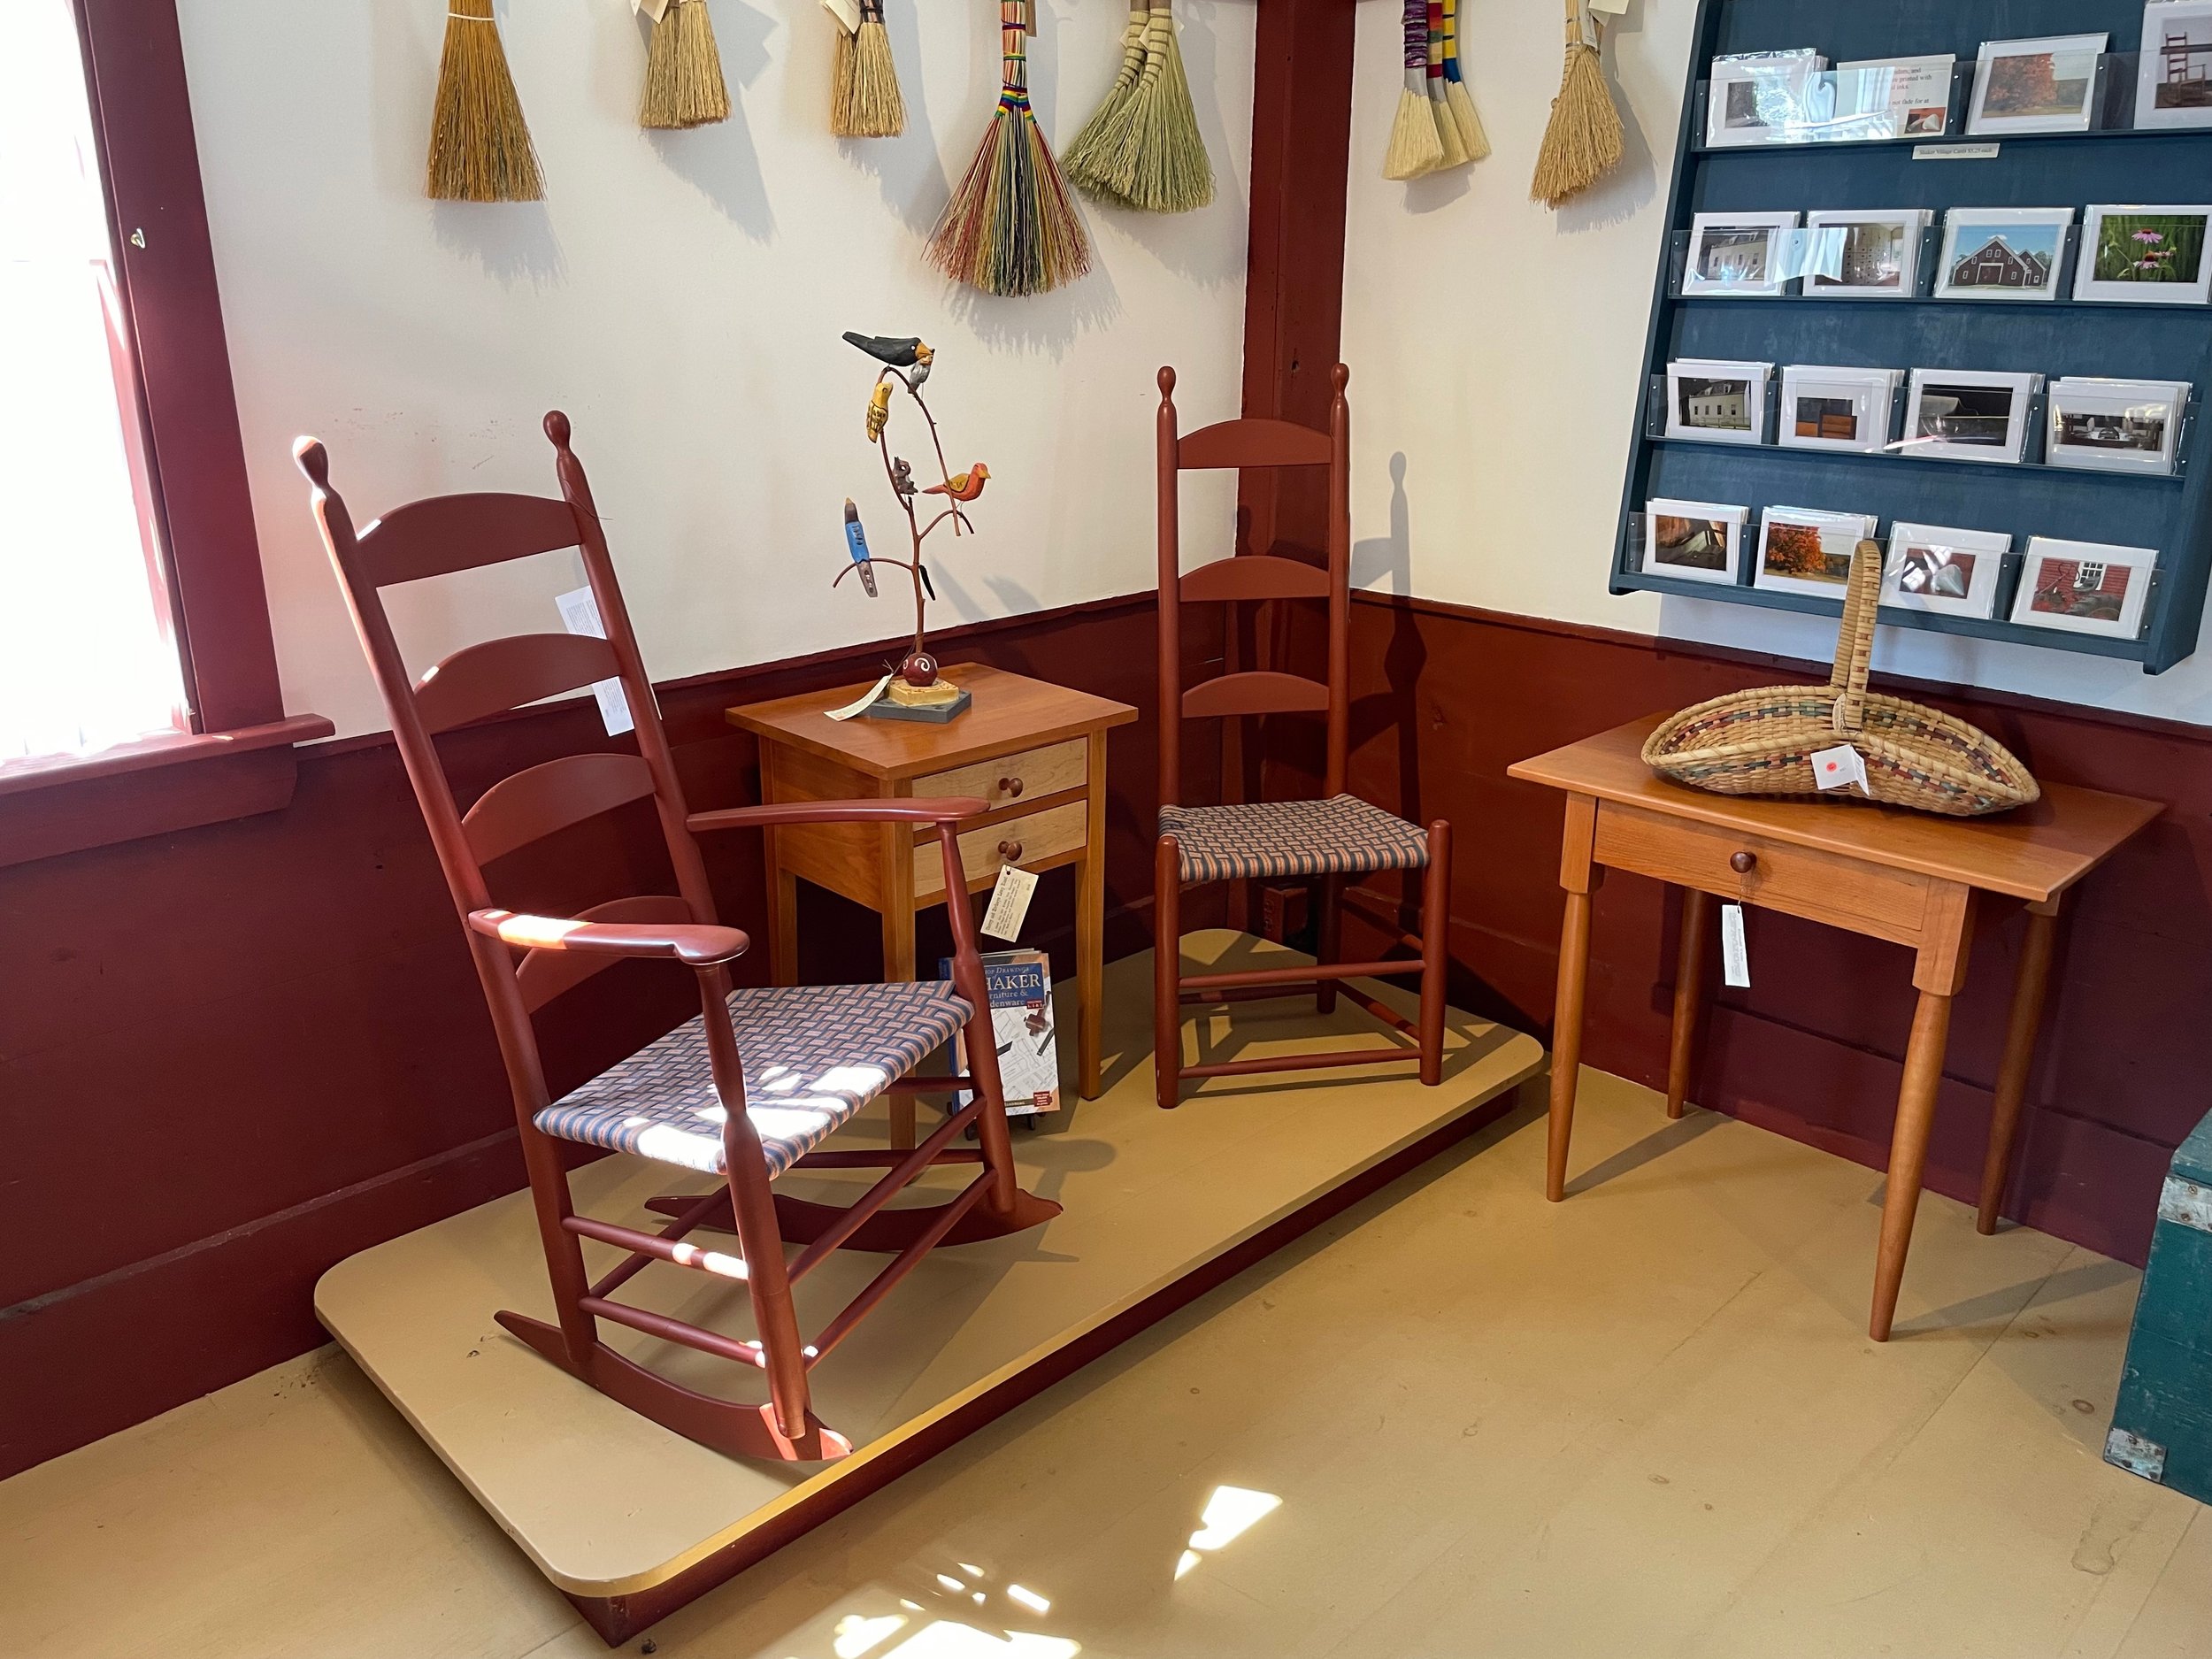  Rocking chairs, tables and other crafts at the Shaker Village gift shop. 